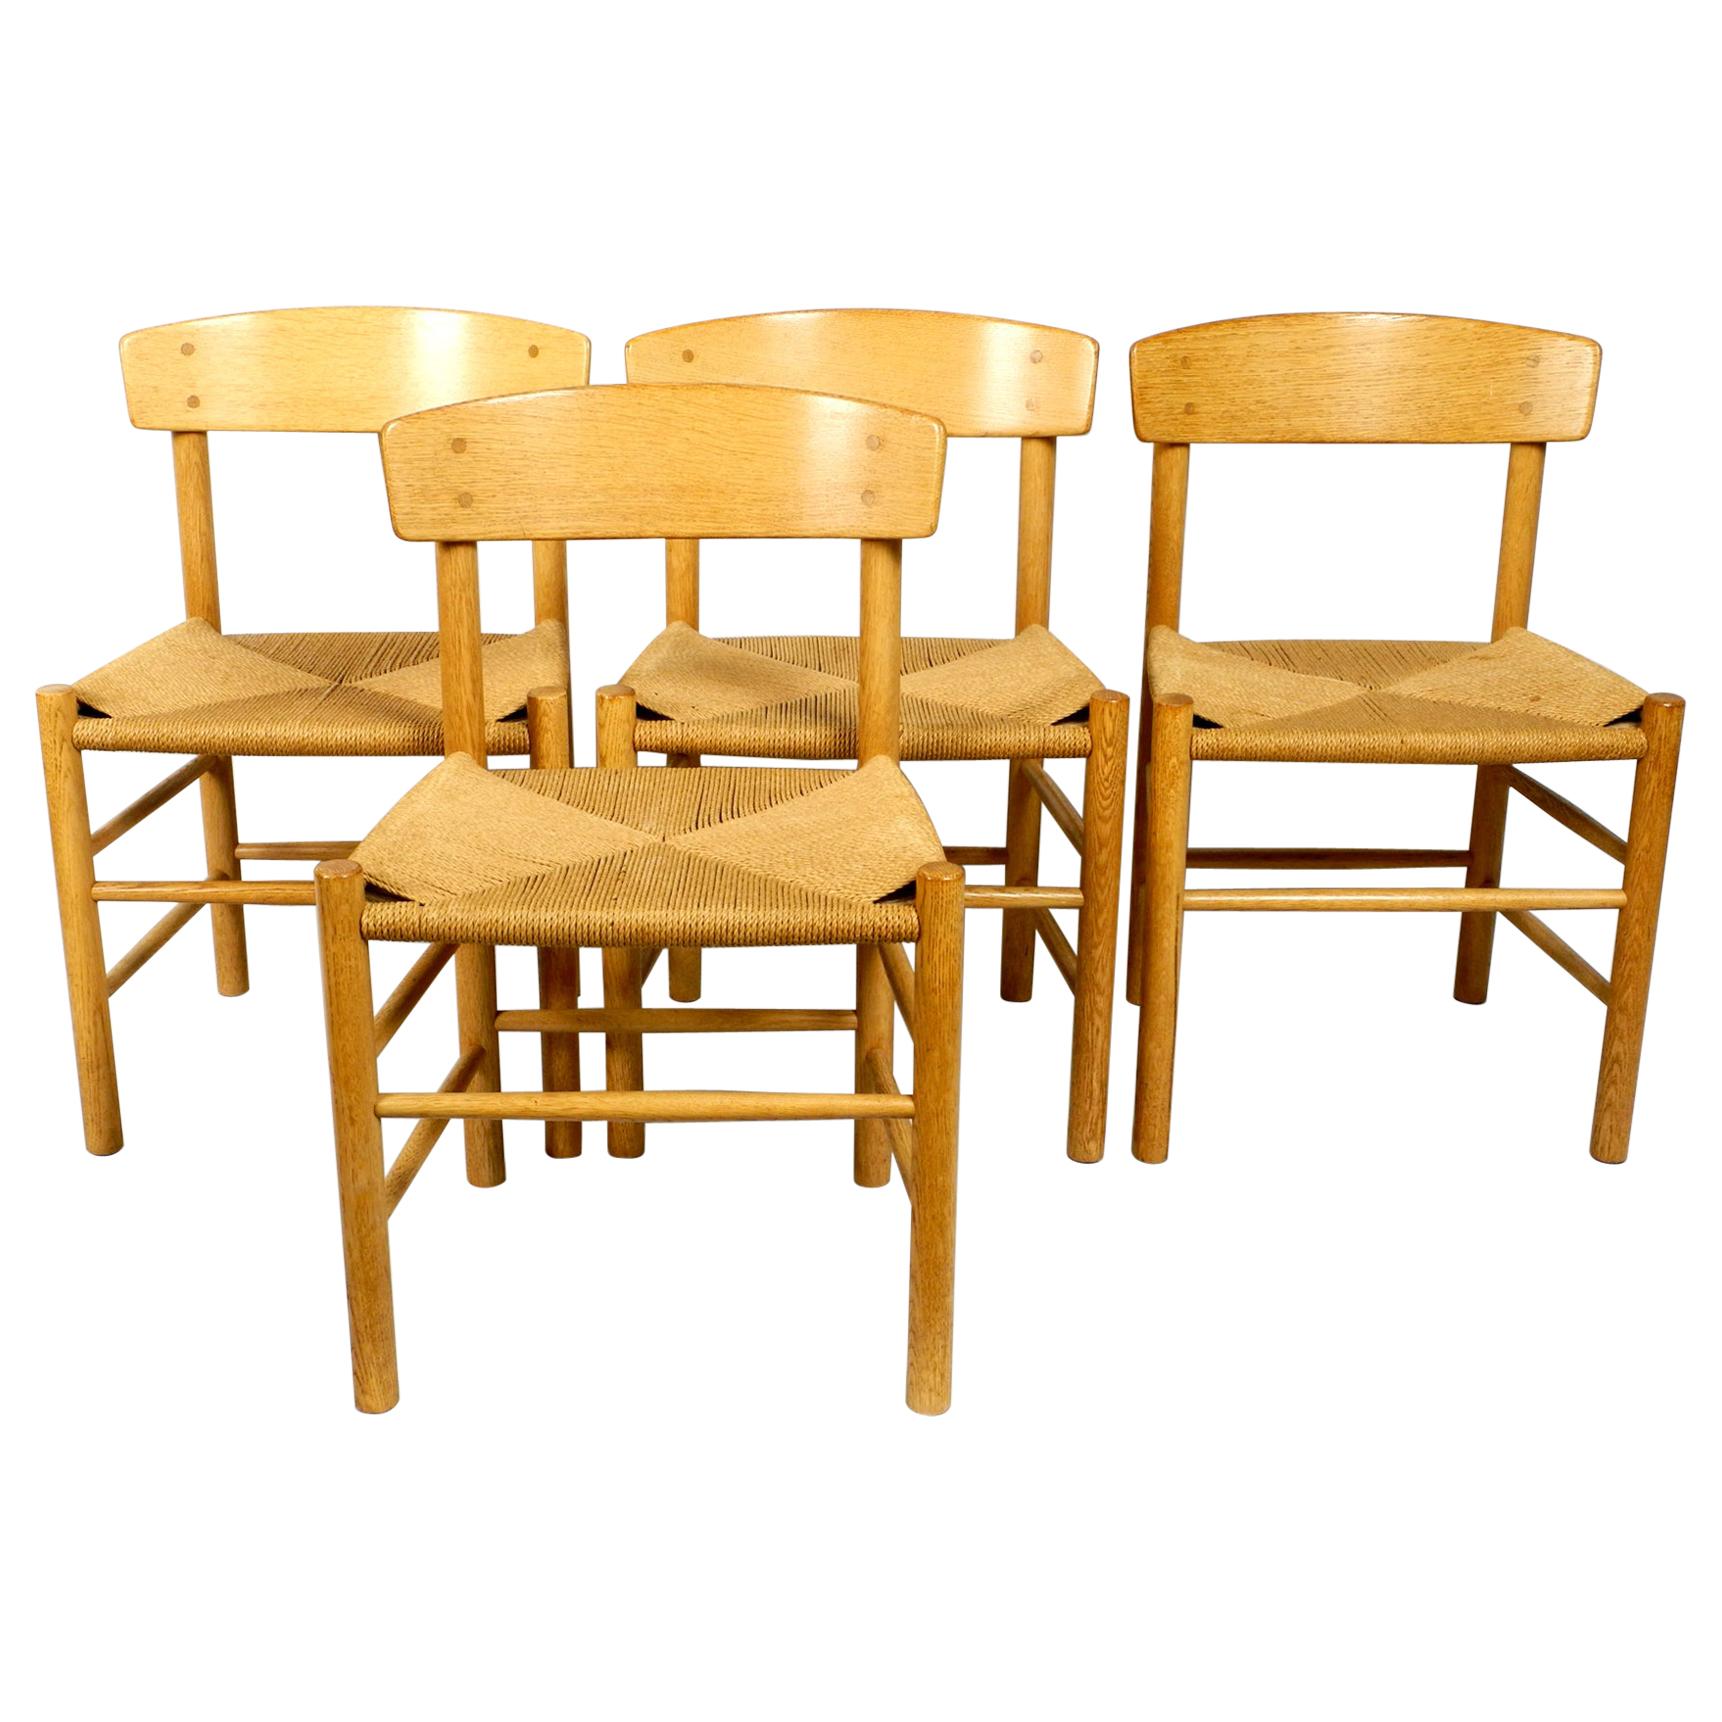 Four J39 Mogensen Chairs in Oak and Cord Weaving by Børge Mogensen Fredericia